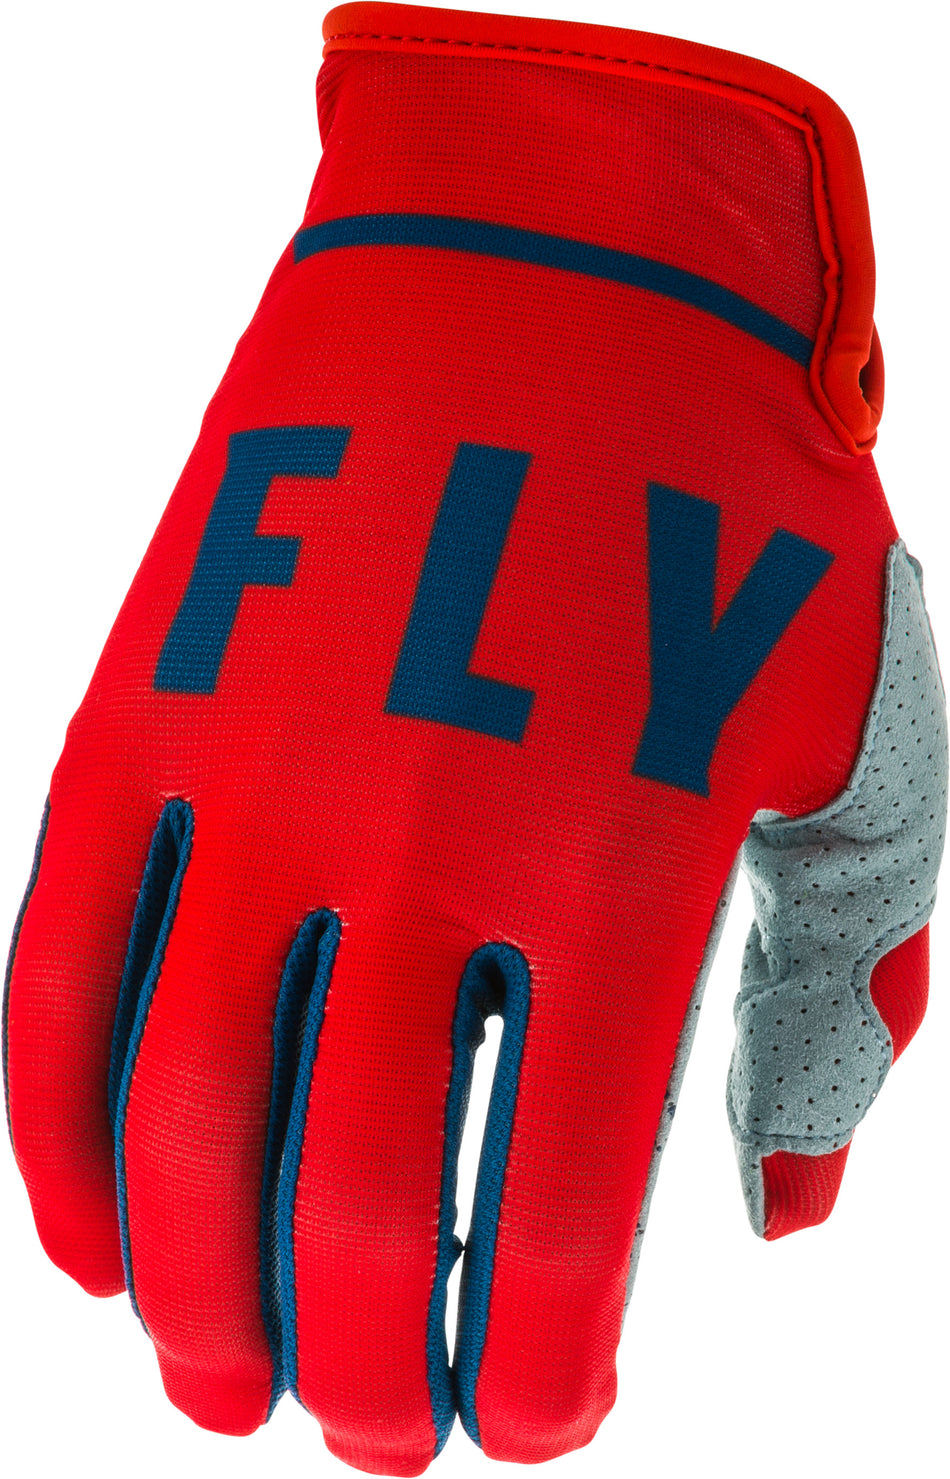 FLY RACING Lite Gloves Red/Slate/Navy Sz 06 373-71206